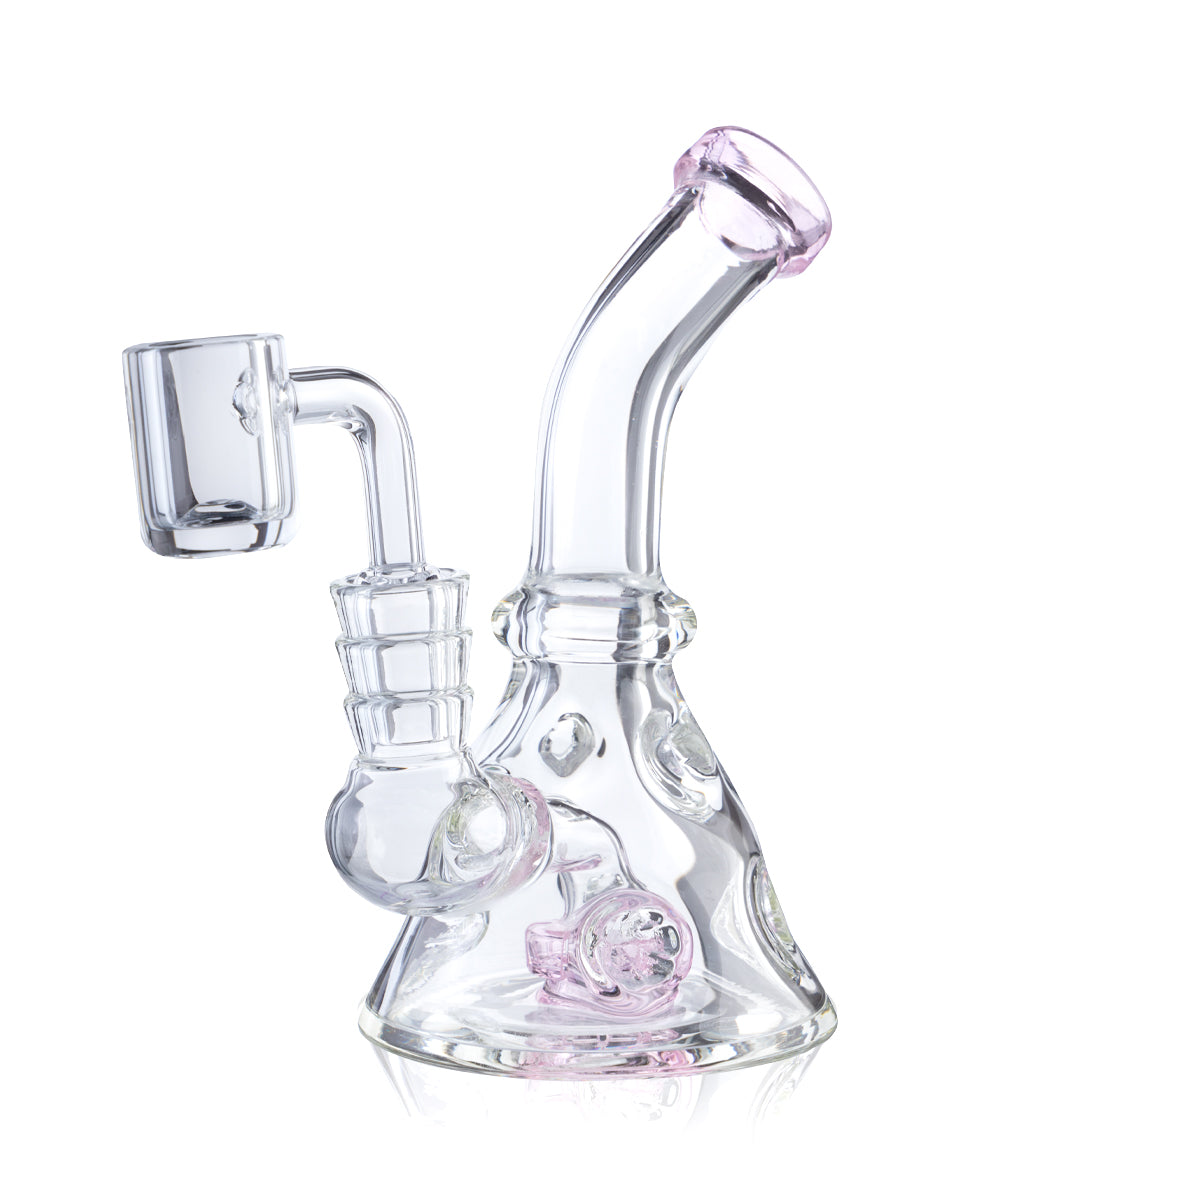 5" Compact Dab Rig - Assorted Colors